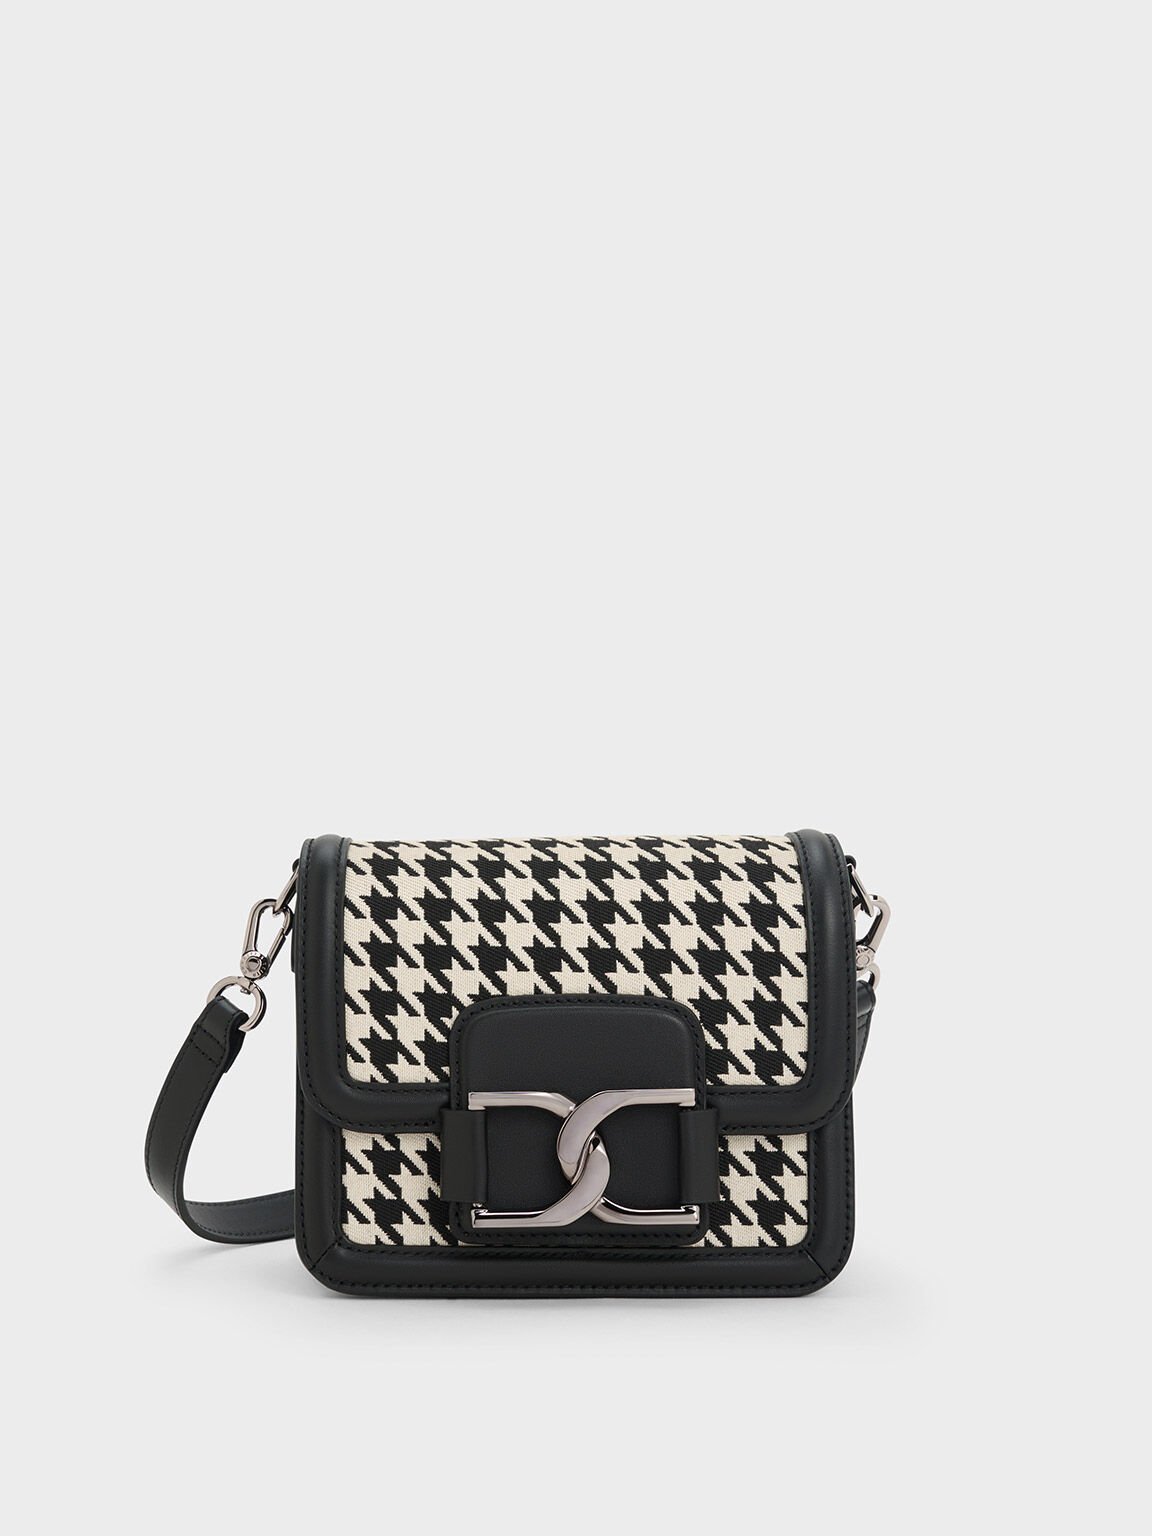 Houndstooth Embossed Square Bag Contrast Binding PU With Bag Charm For  Daily Life